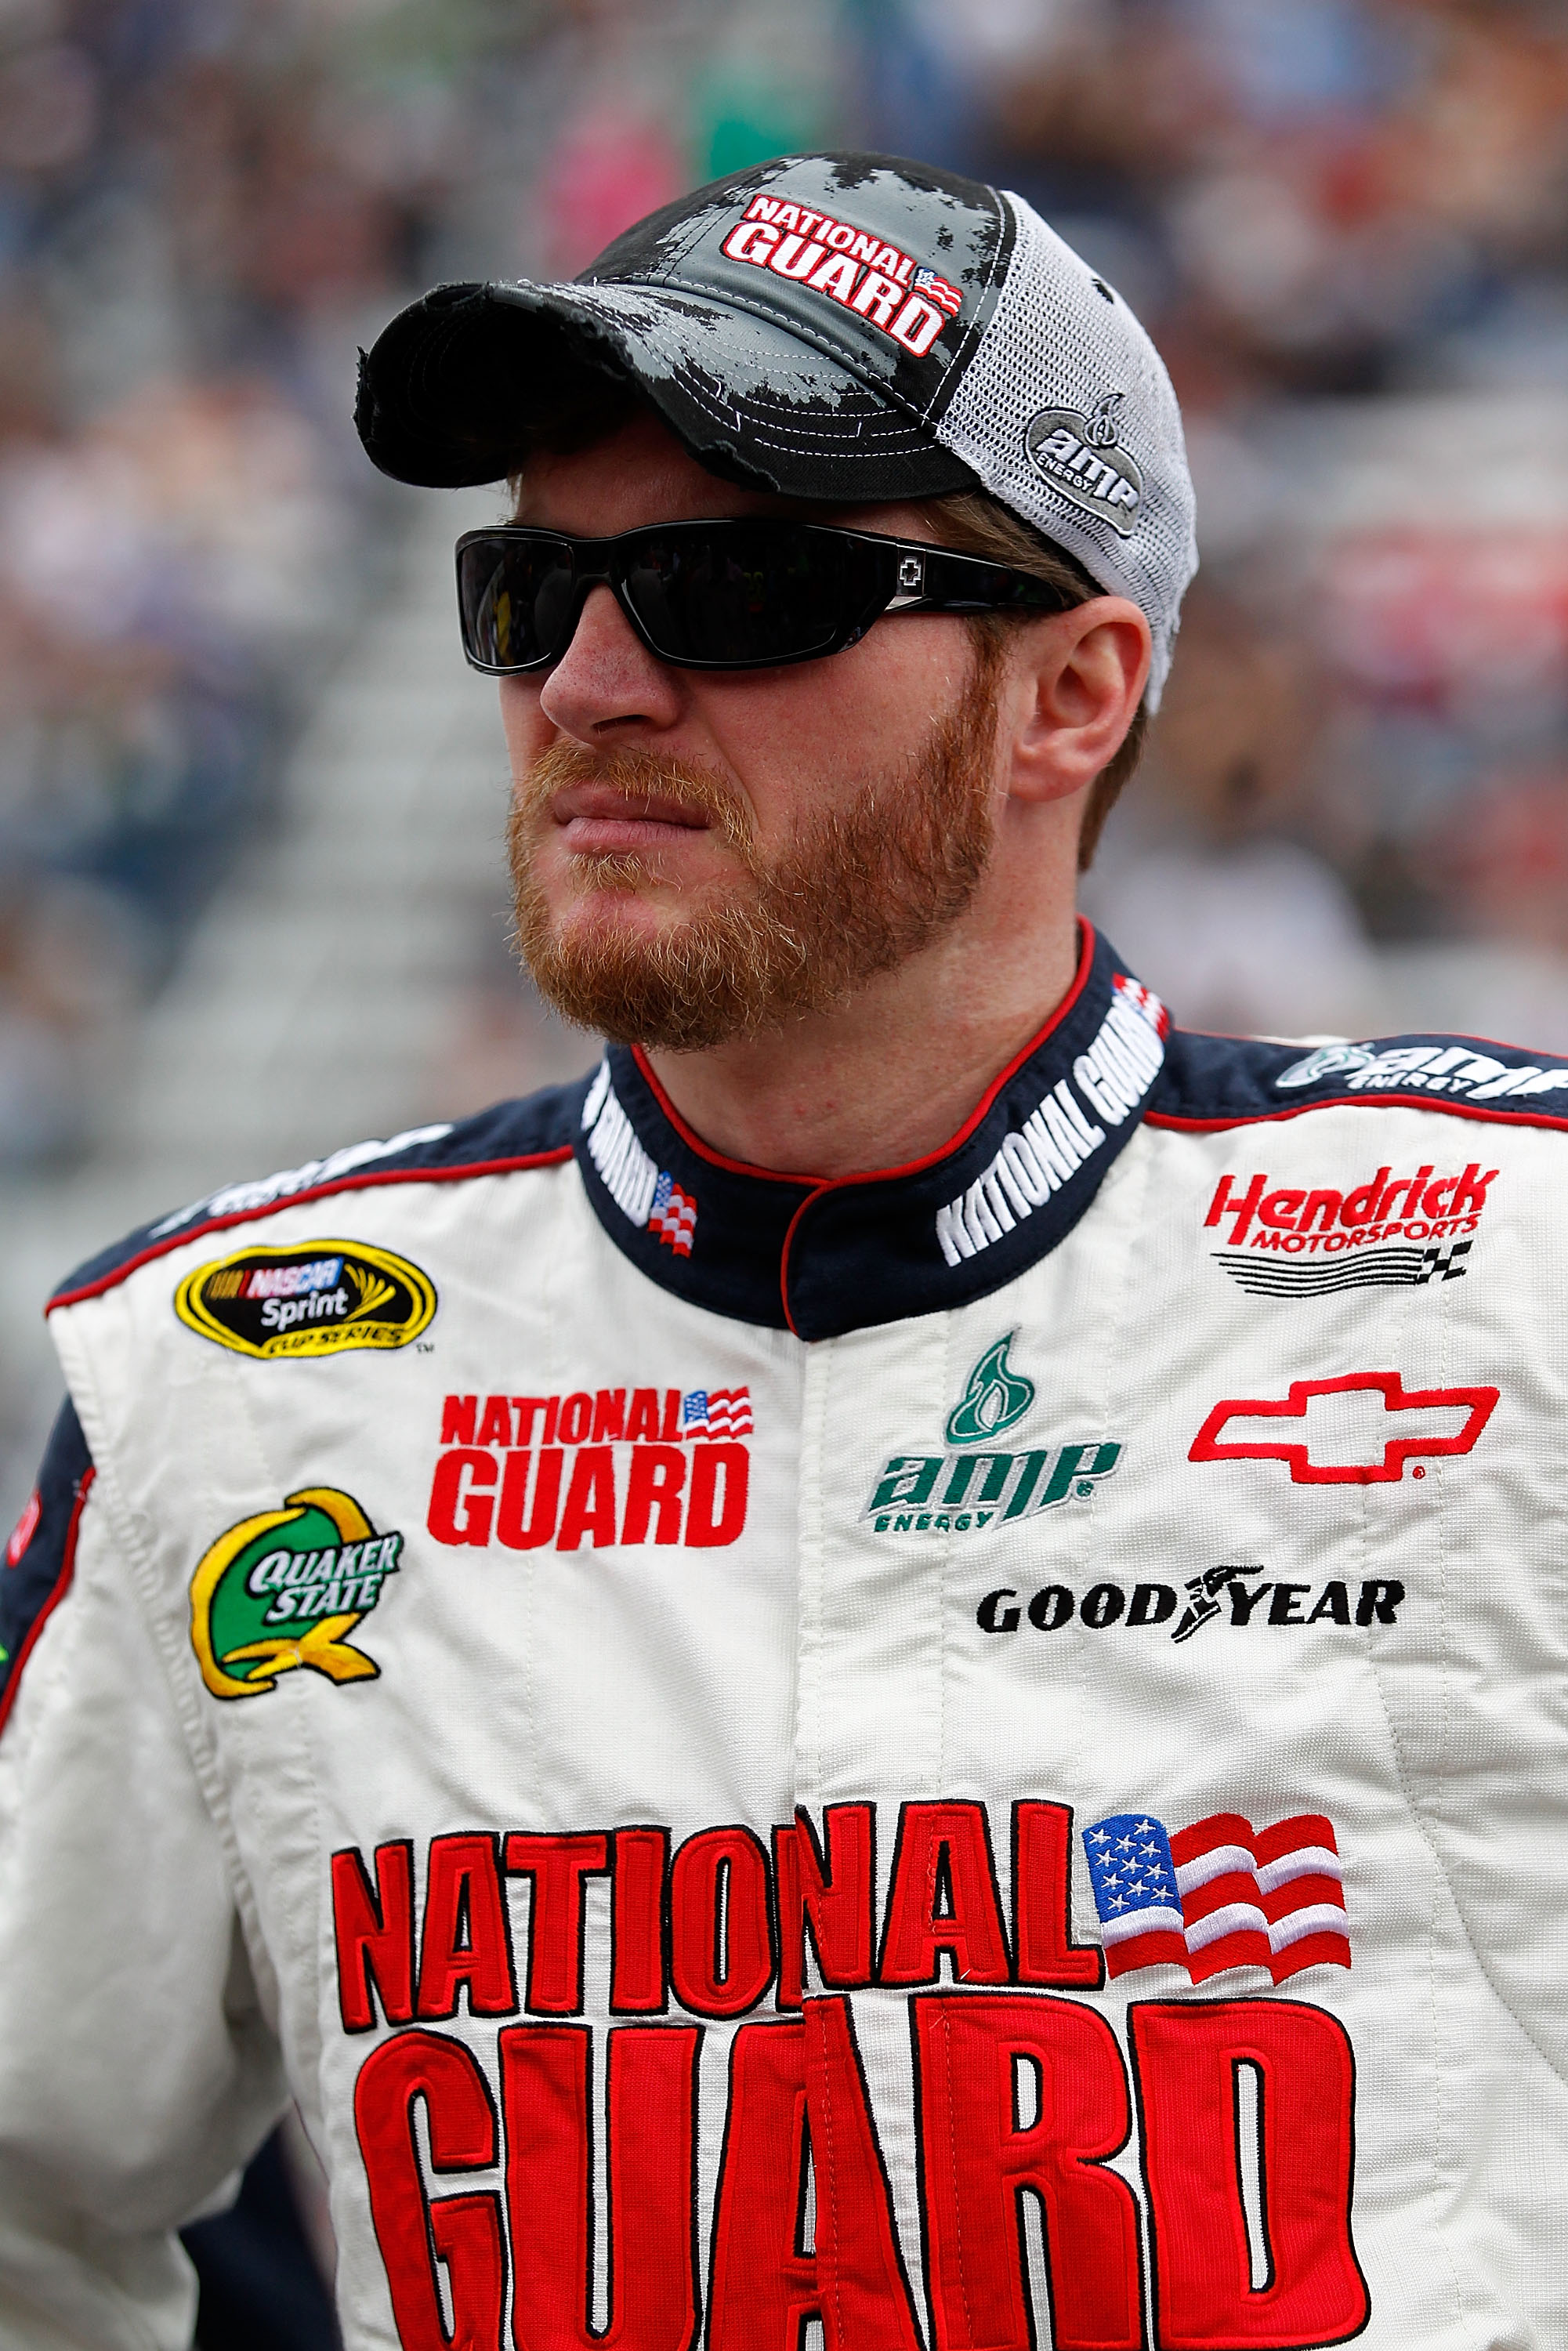 BRISTOL, TN - MARCH 20: Dale Earnhardt Jr., driver of the #88 National Guard/AMP Energy Chevrolet, stands on the grid prior to the start of the NASCAR Sprint Cup Series Jeff Byrd 500 Presented By Food City at Bristol Motor Speedway on March 20, 2011 in Br